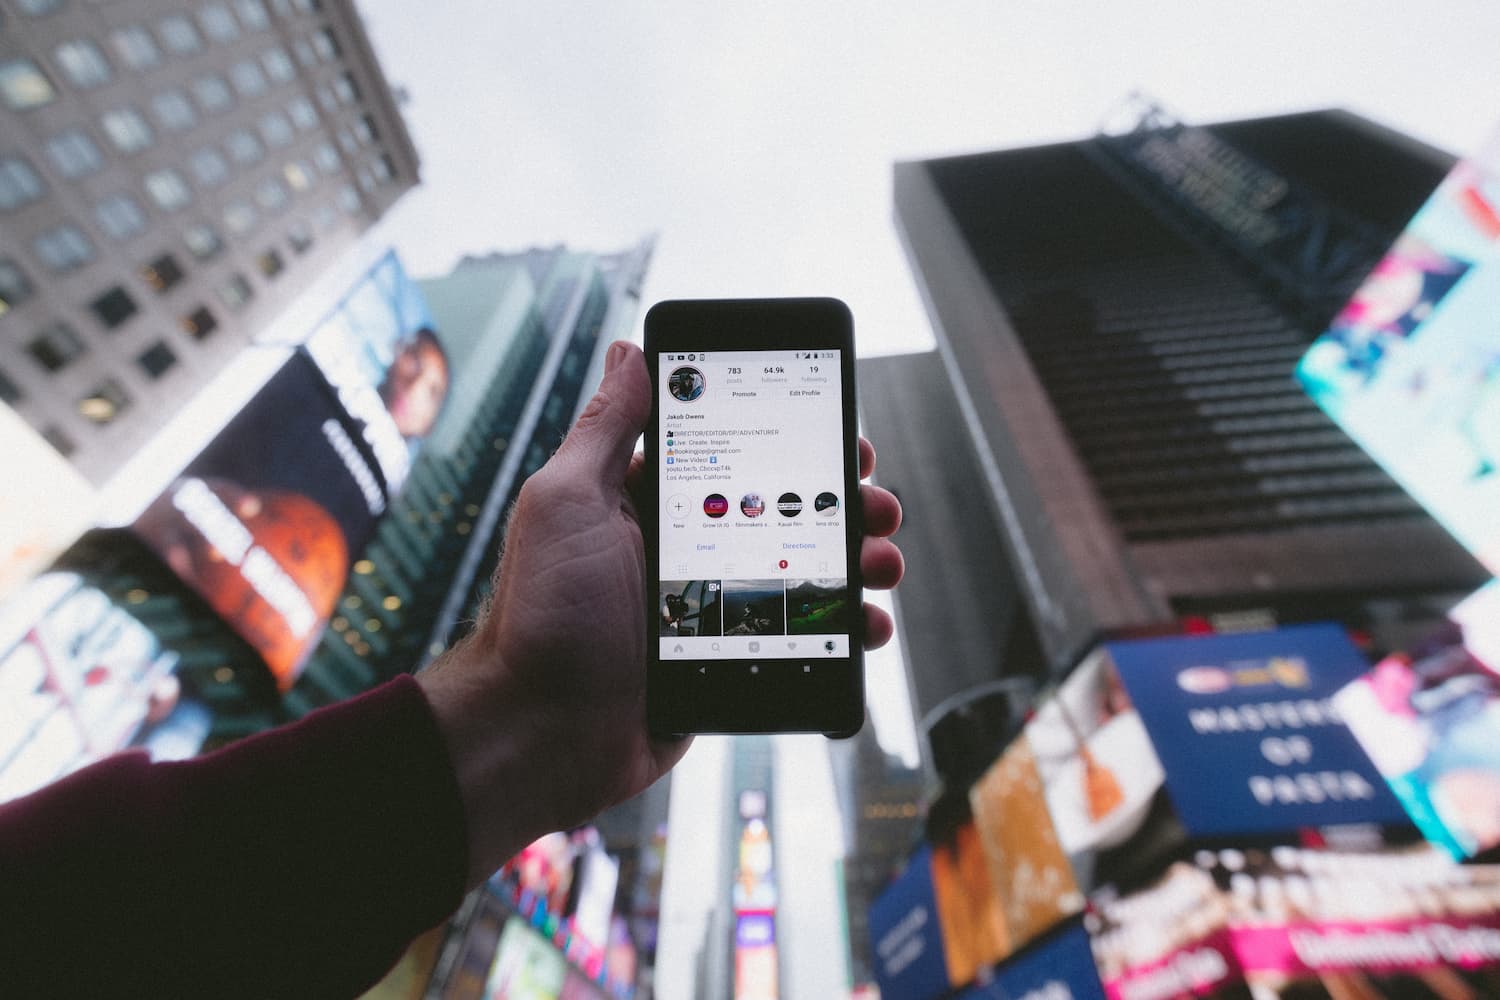 A hand holding phone with Instagram on screen against background of skyscrapers